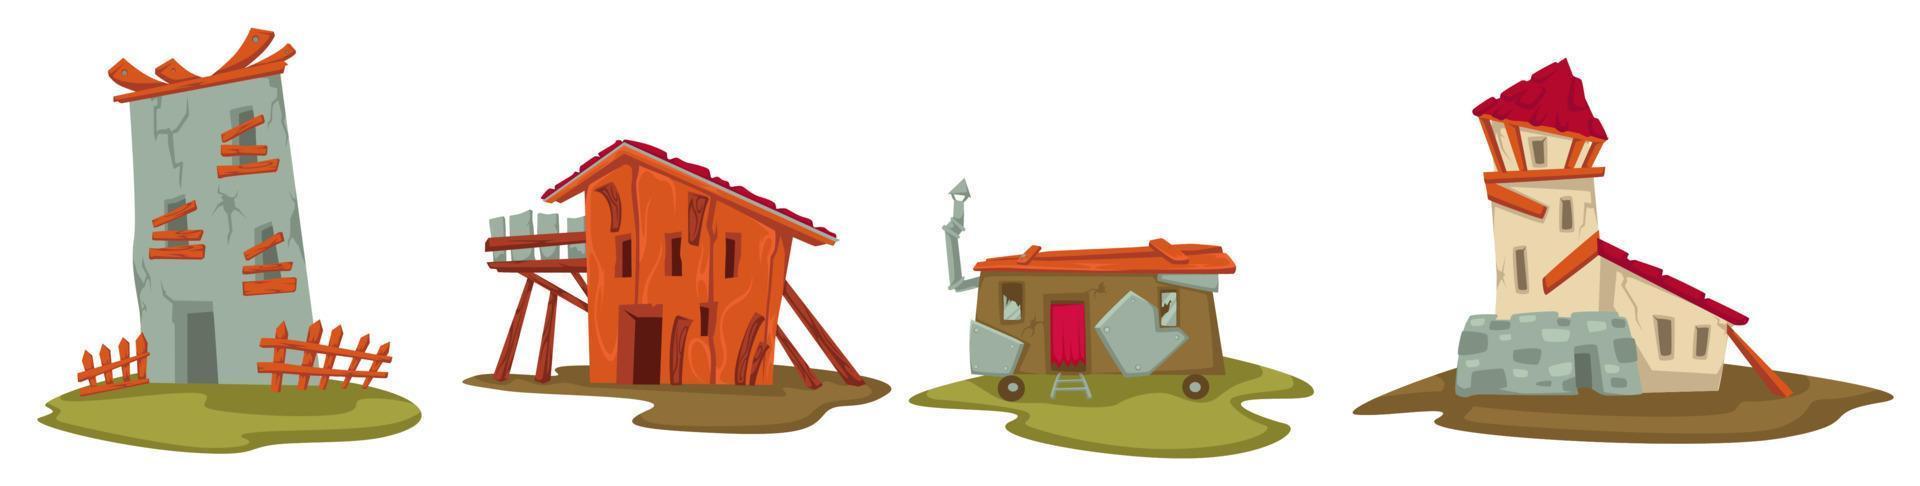 Old weathered buildings and houses, rural homes vector